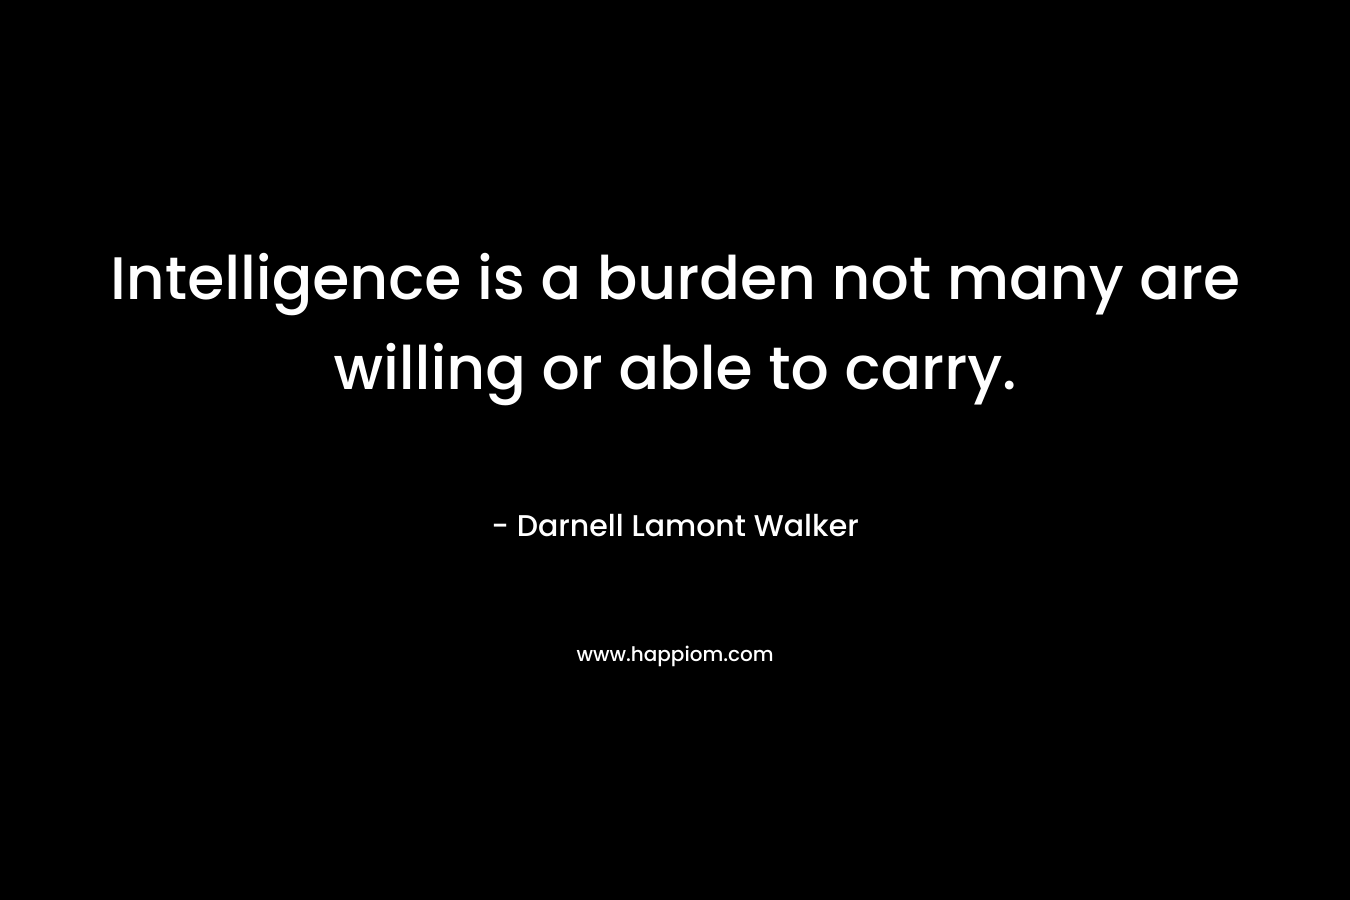 Intelligence is a burden not many are willing or able to carry.